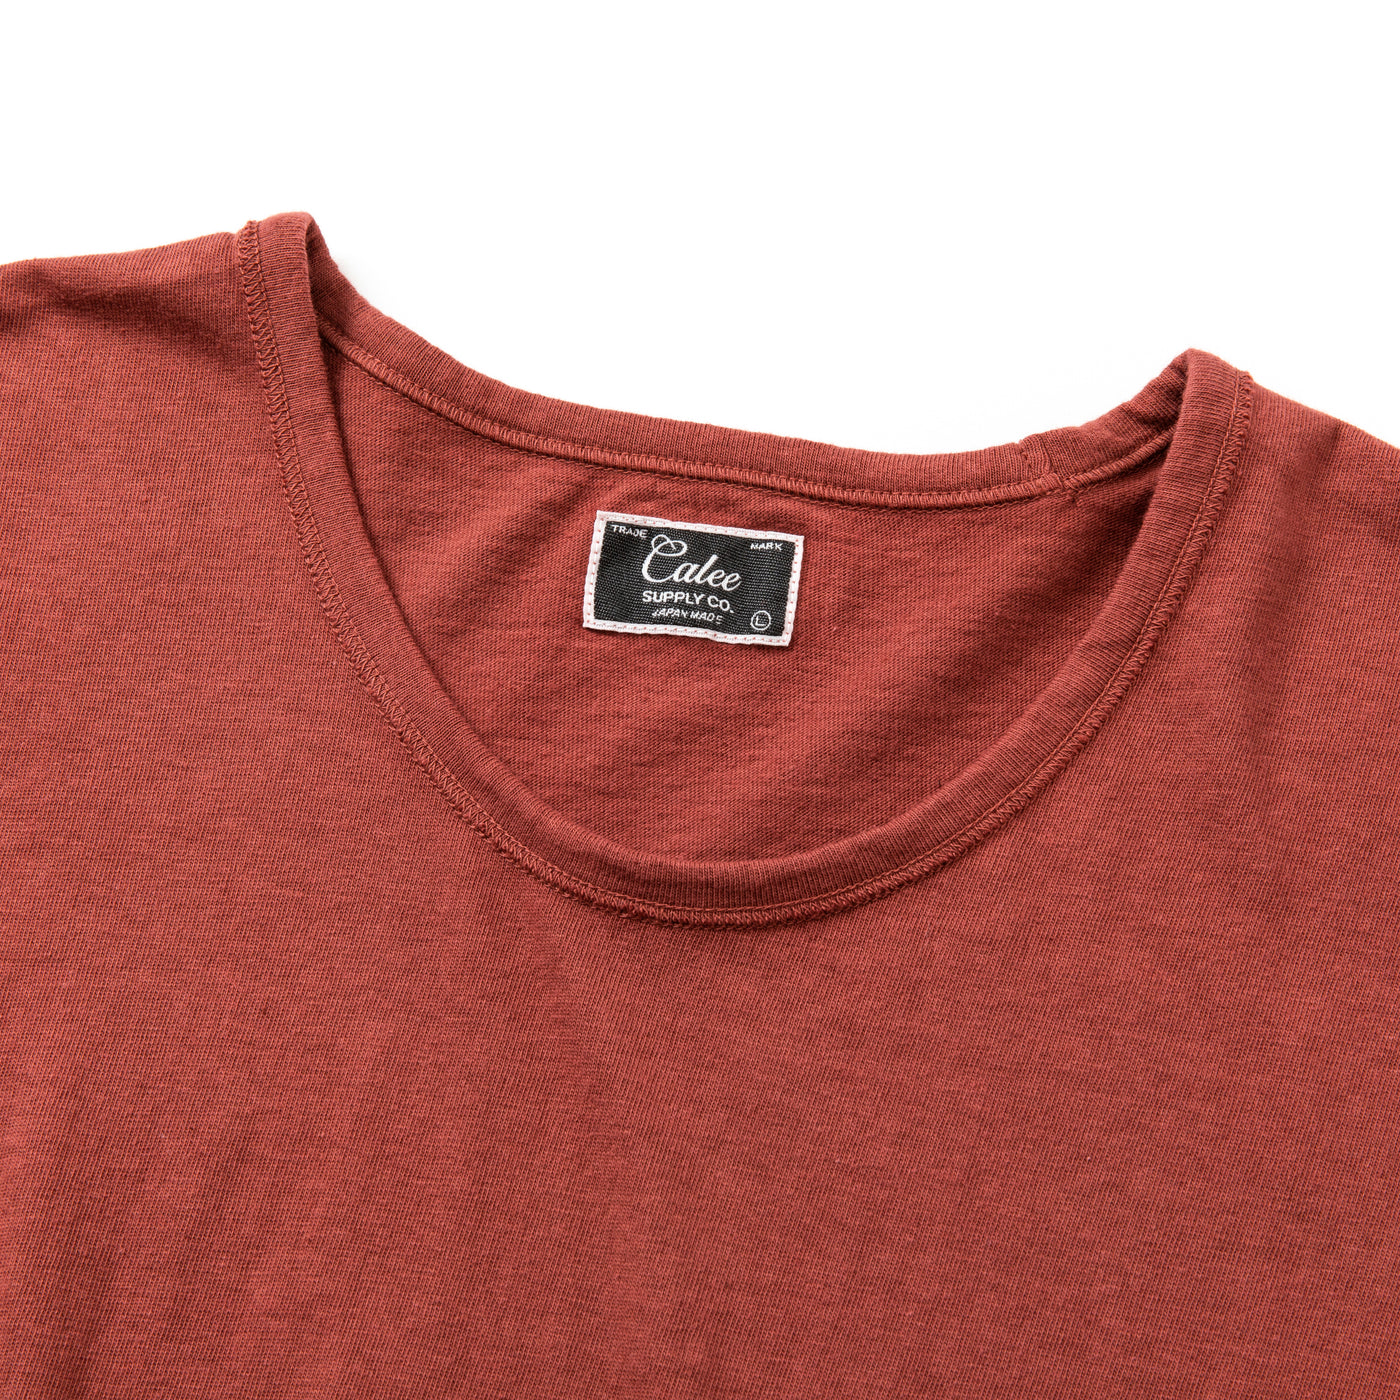 VINTAGE REPRODUCT TYPE CREW NECK T-SHIRT